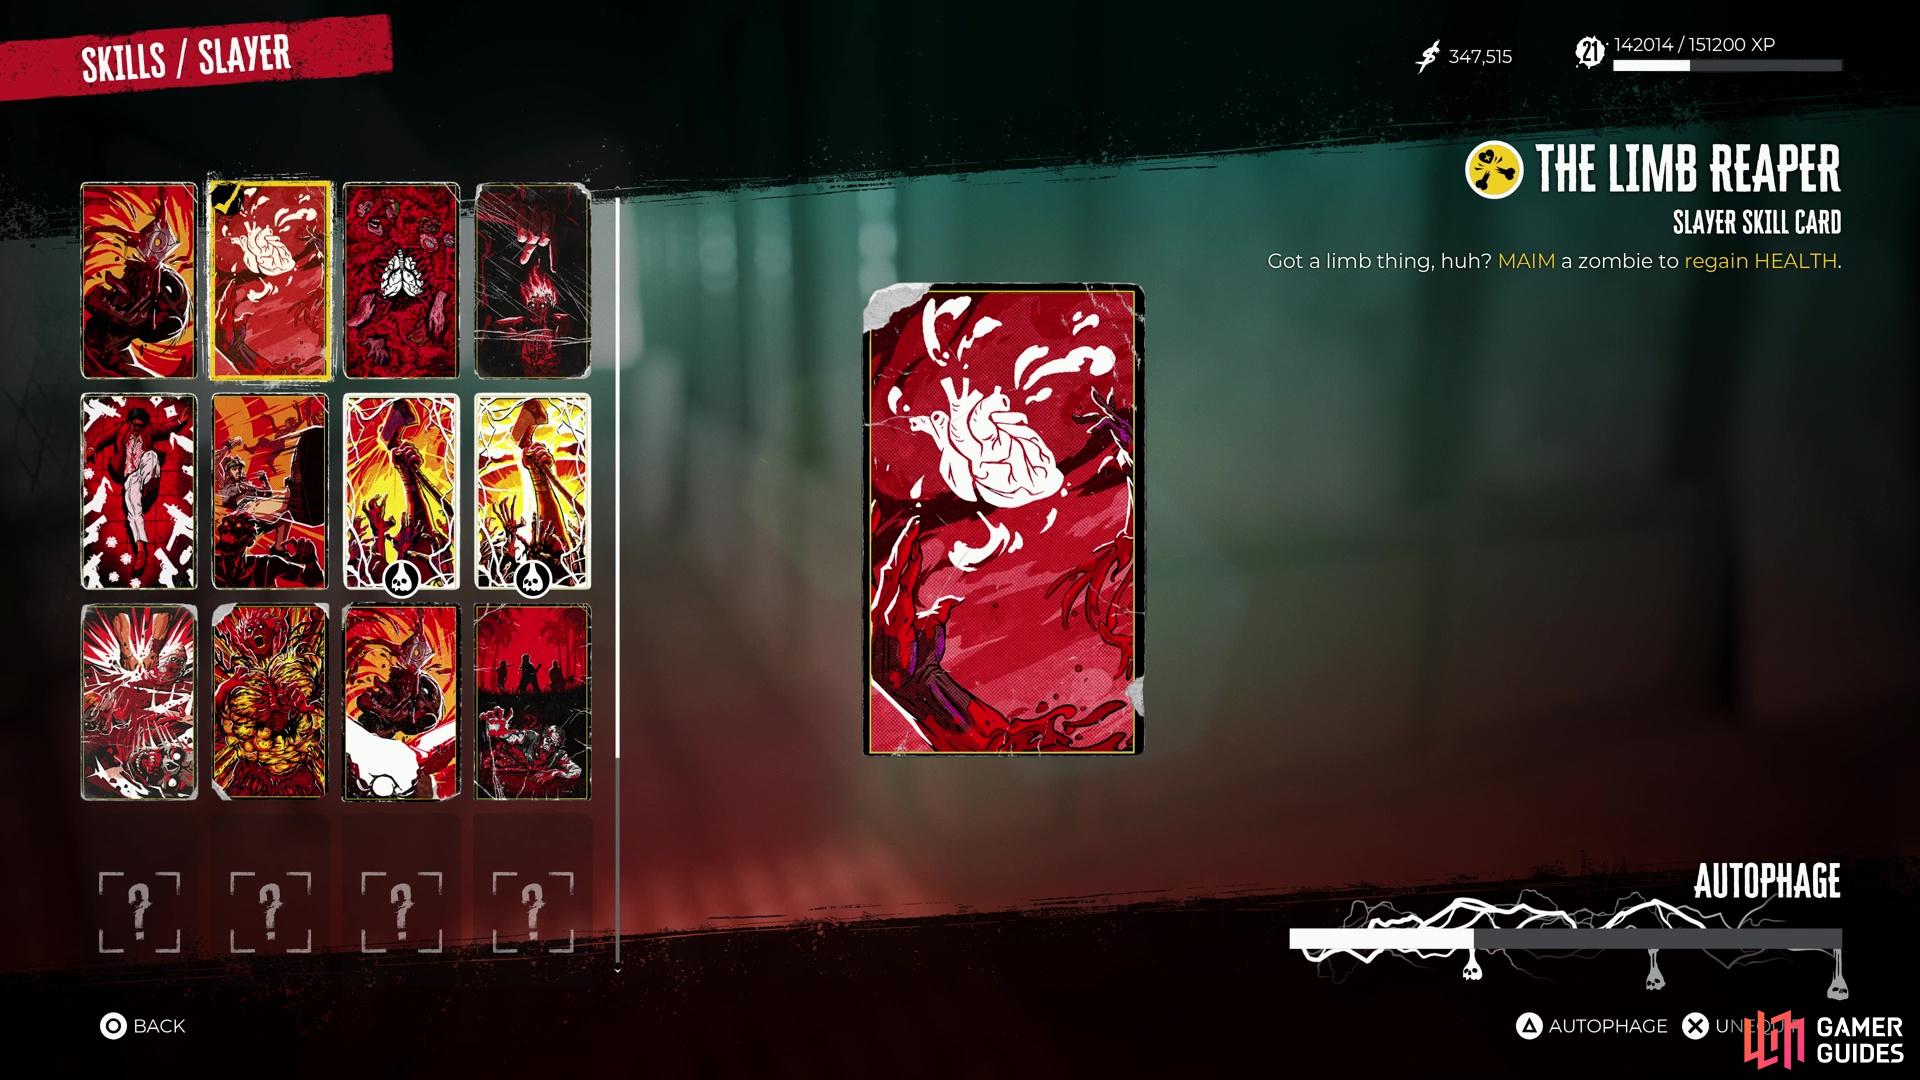 Save your Med Kits - with The Limb Reaper Skill Card equipped, you’ll gain Health every time you maim an enemy.